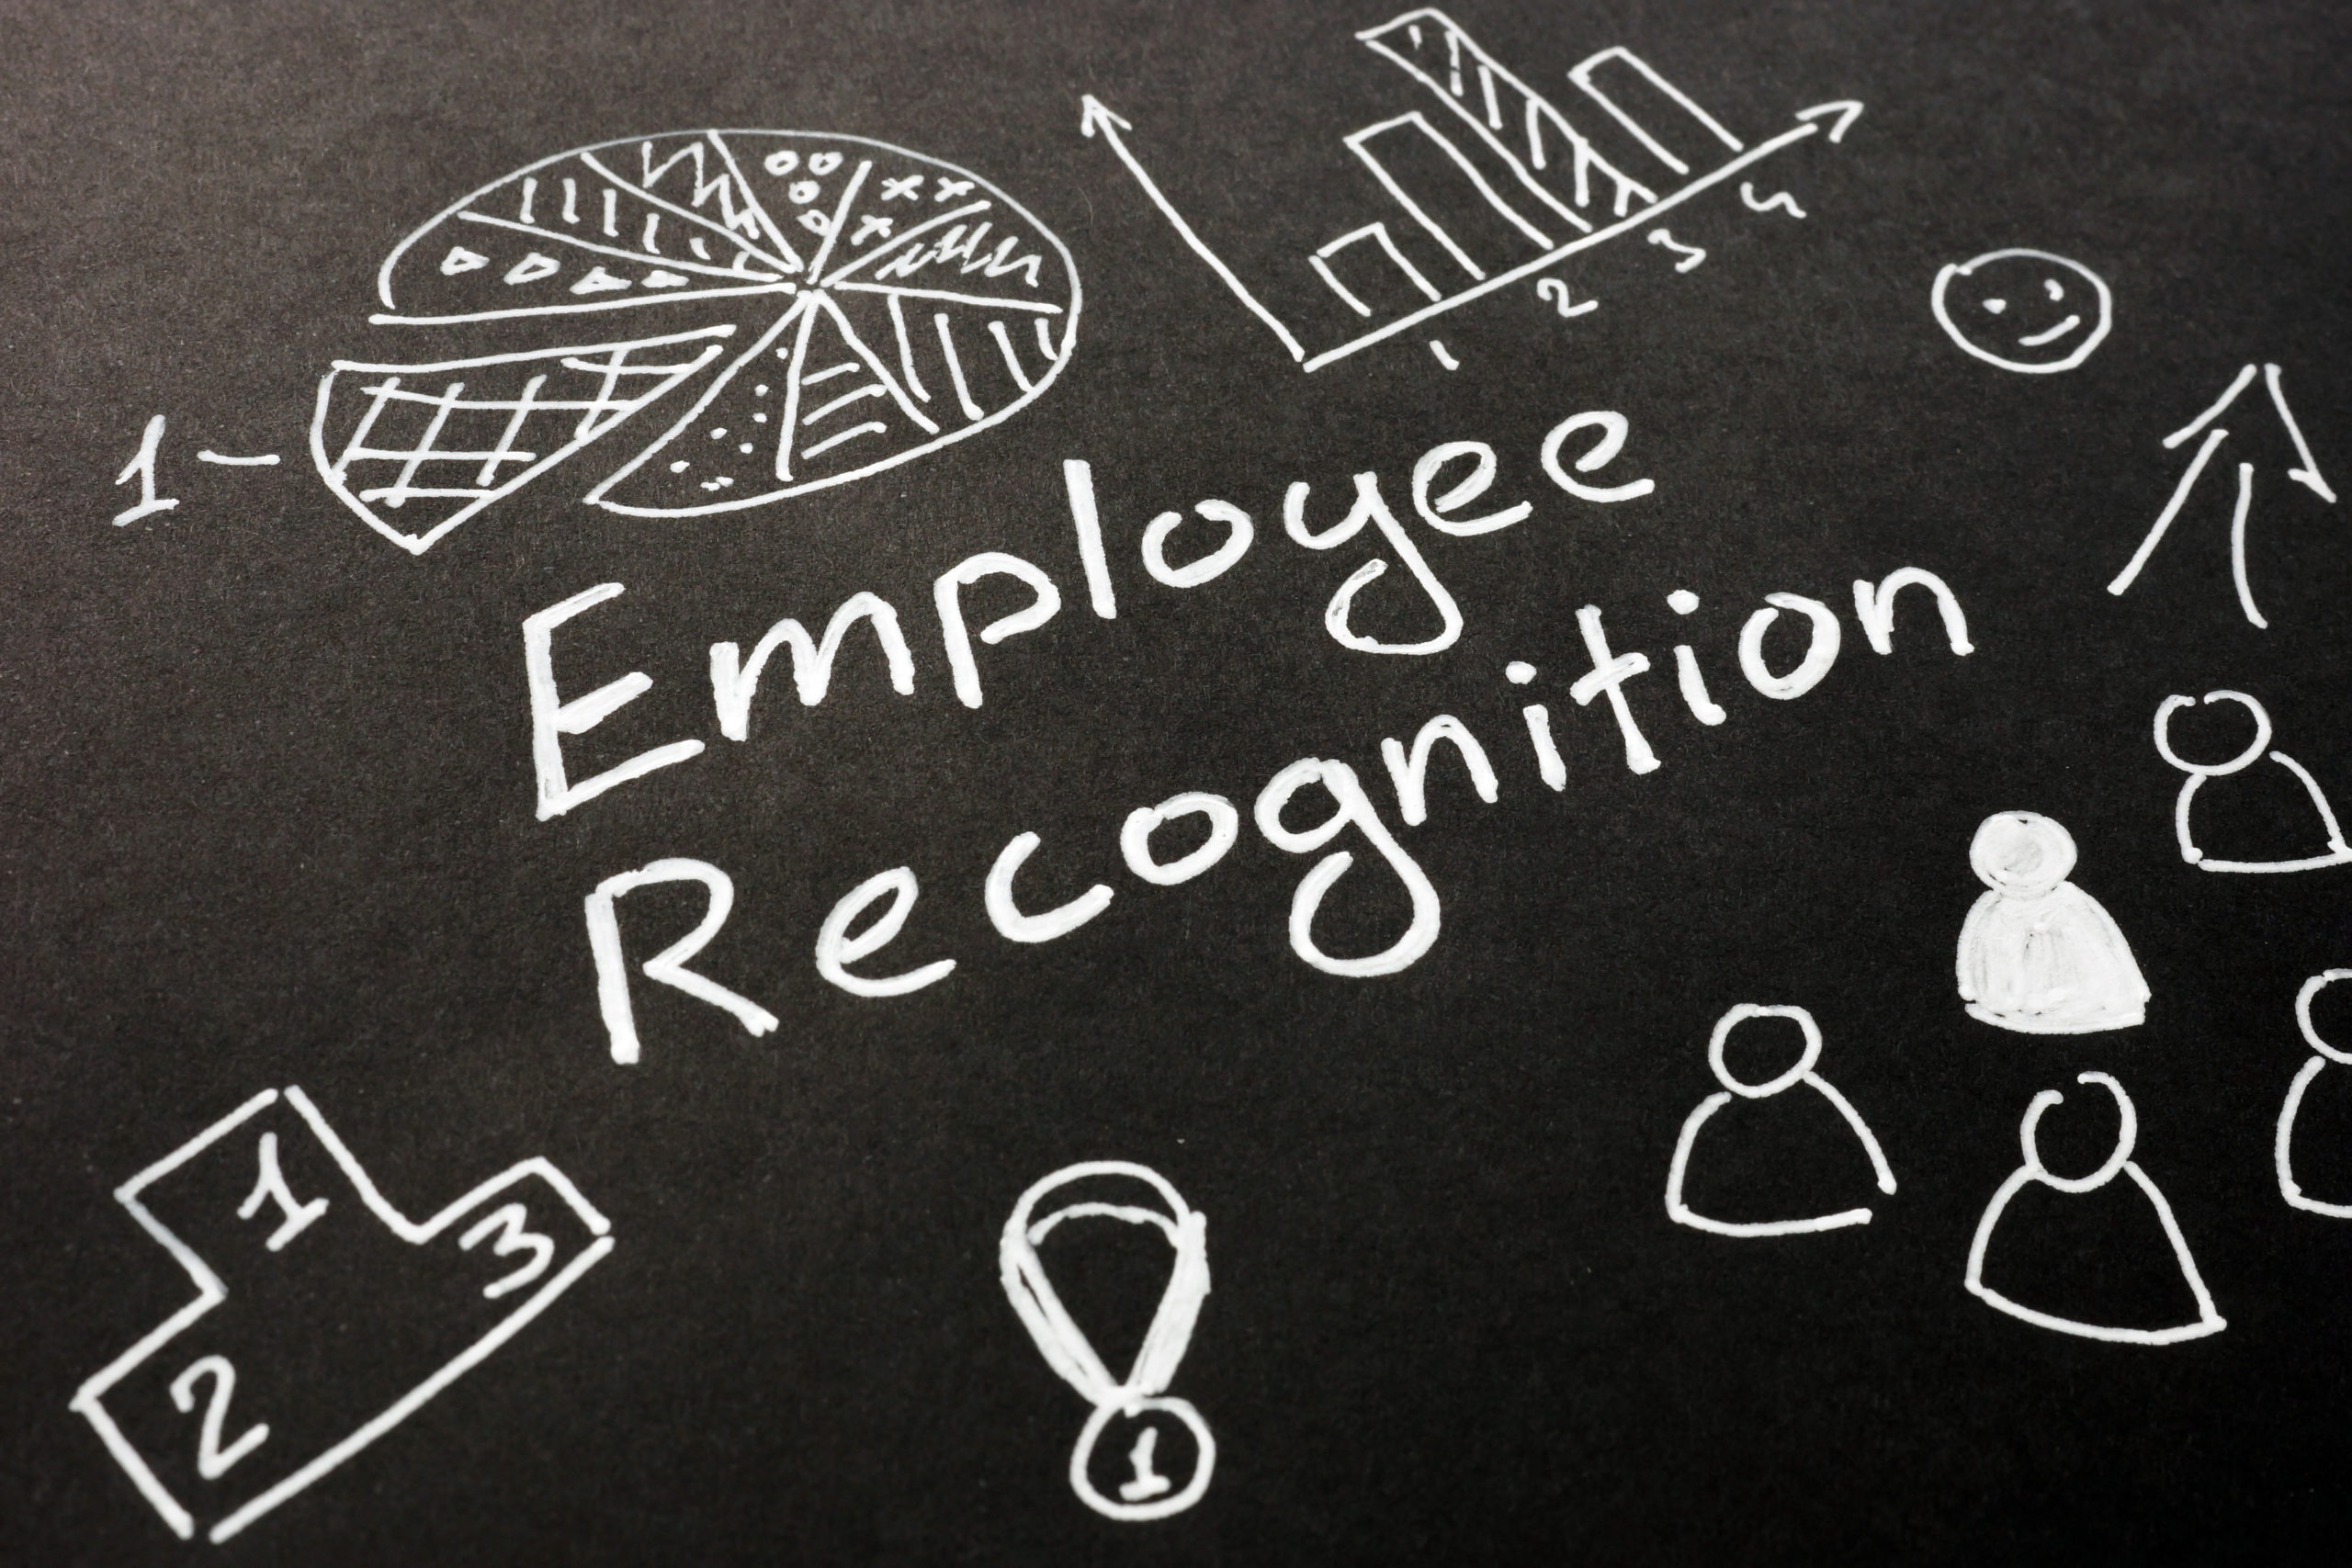 Employee recognition inscription on the black sheet.